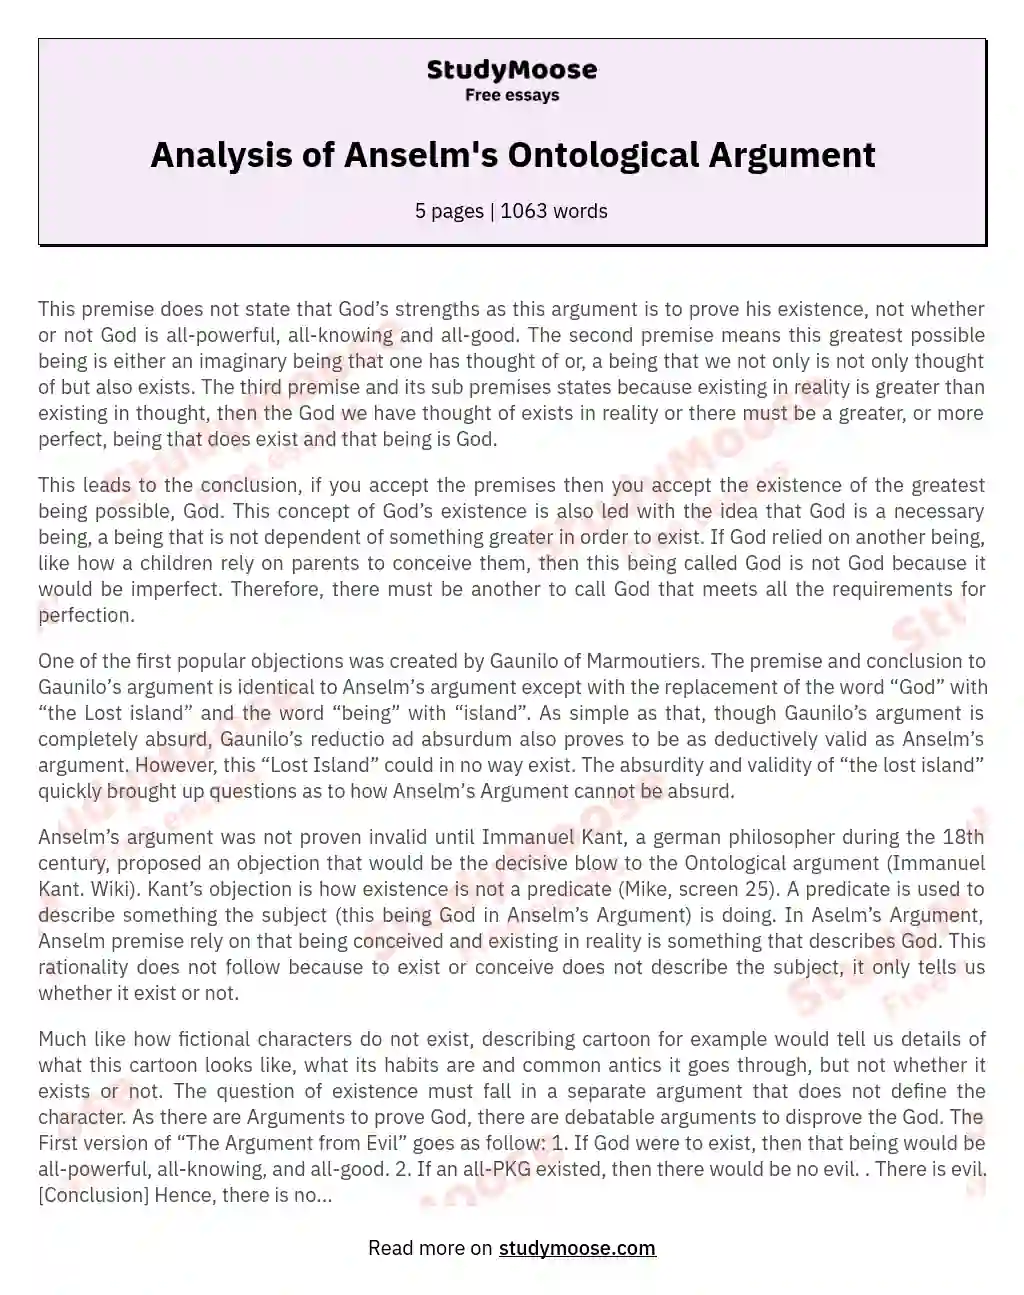 Analysis of Anselm's Ontological Argument essay